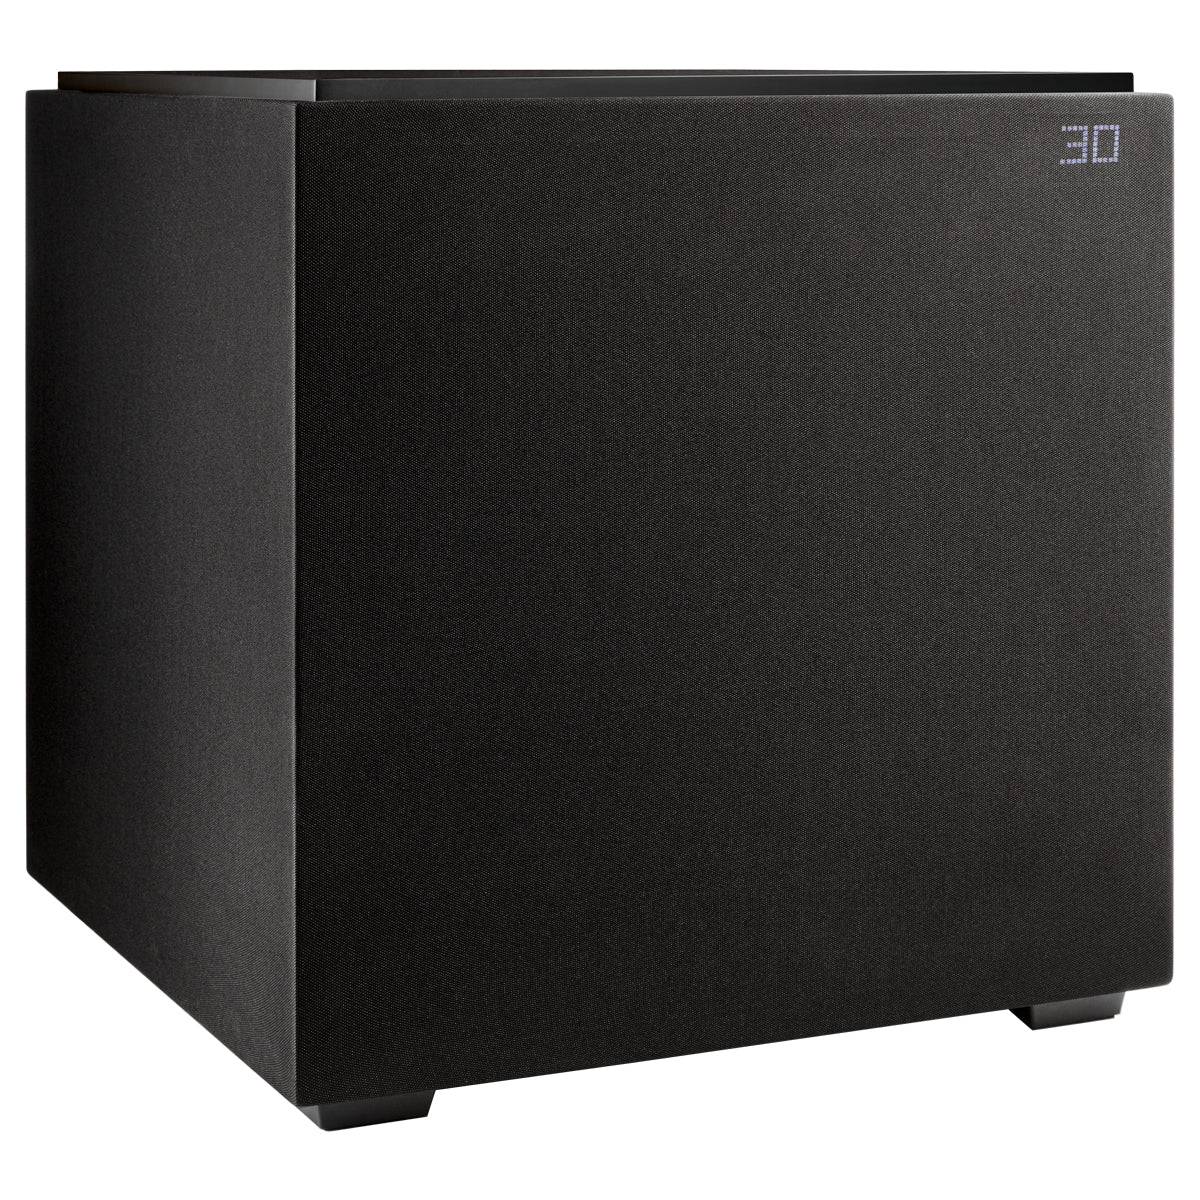 Definitive Technology DN12 Powered 12" active subwoofer - The Audio Experts